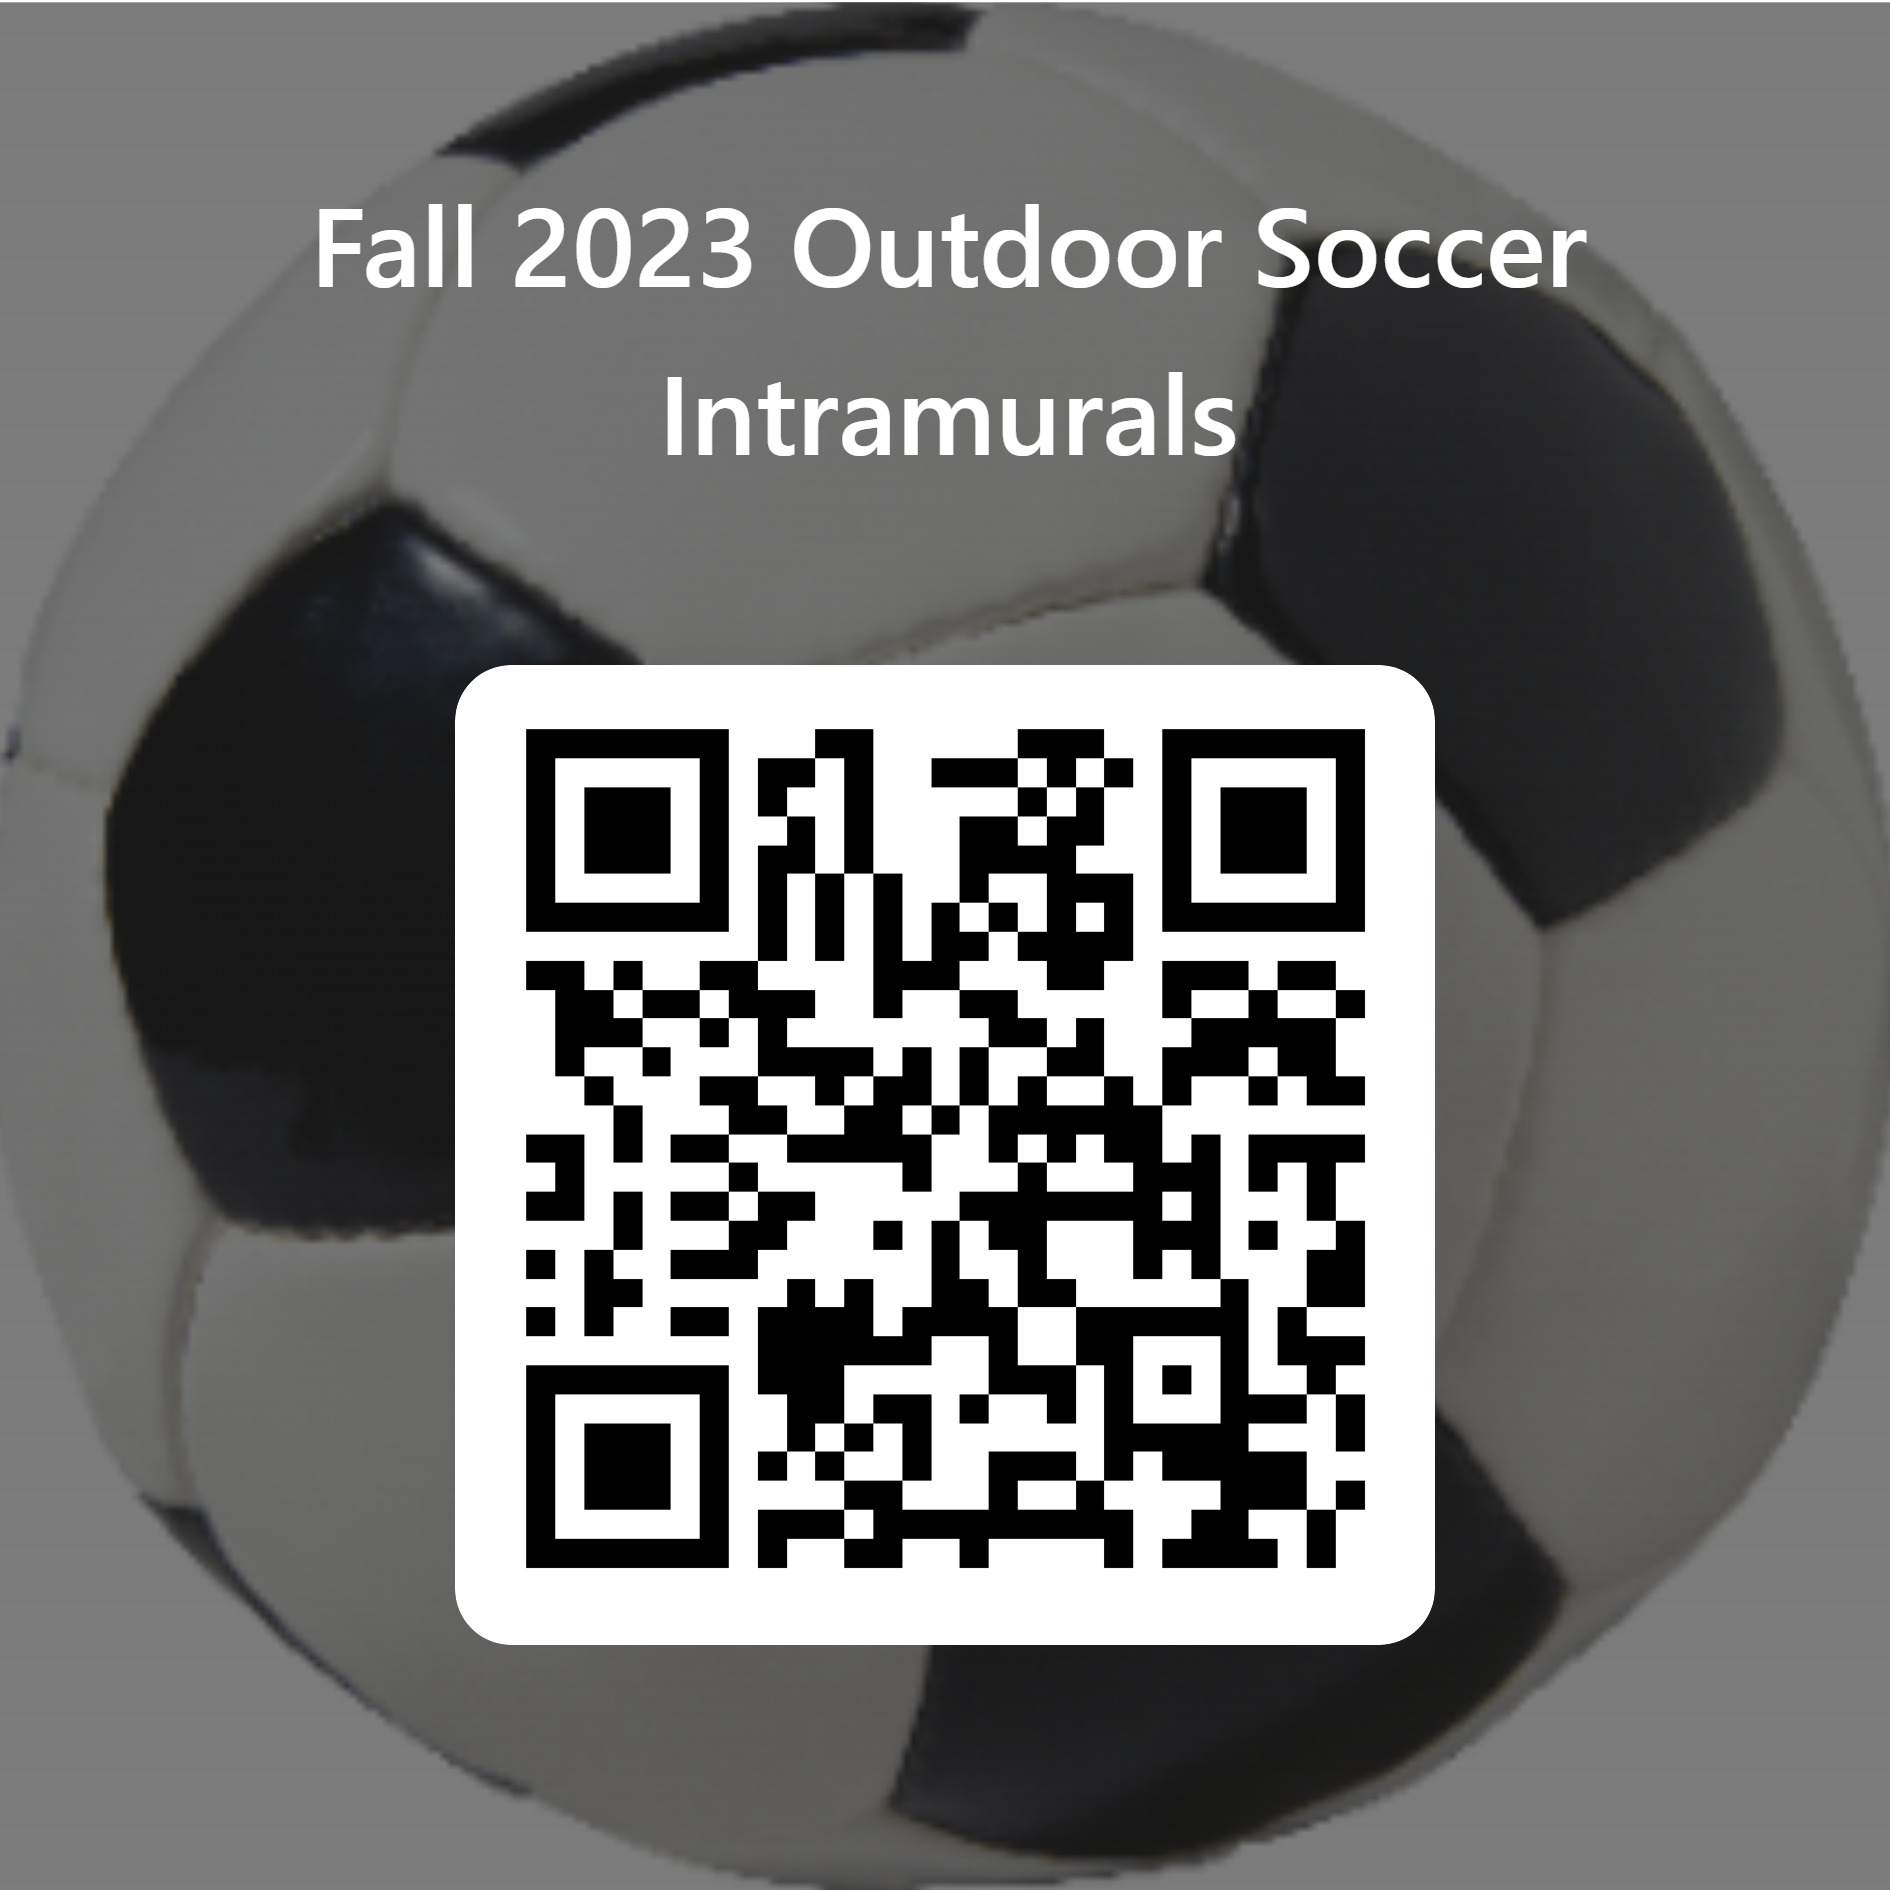 qrcode-for-fall-2023-outdoor-soccer-intramurals.png